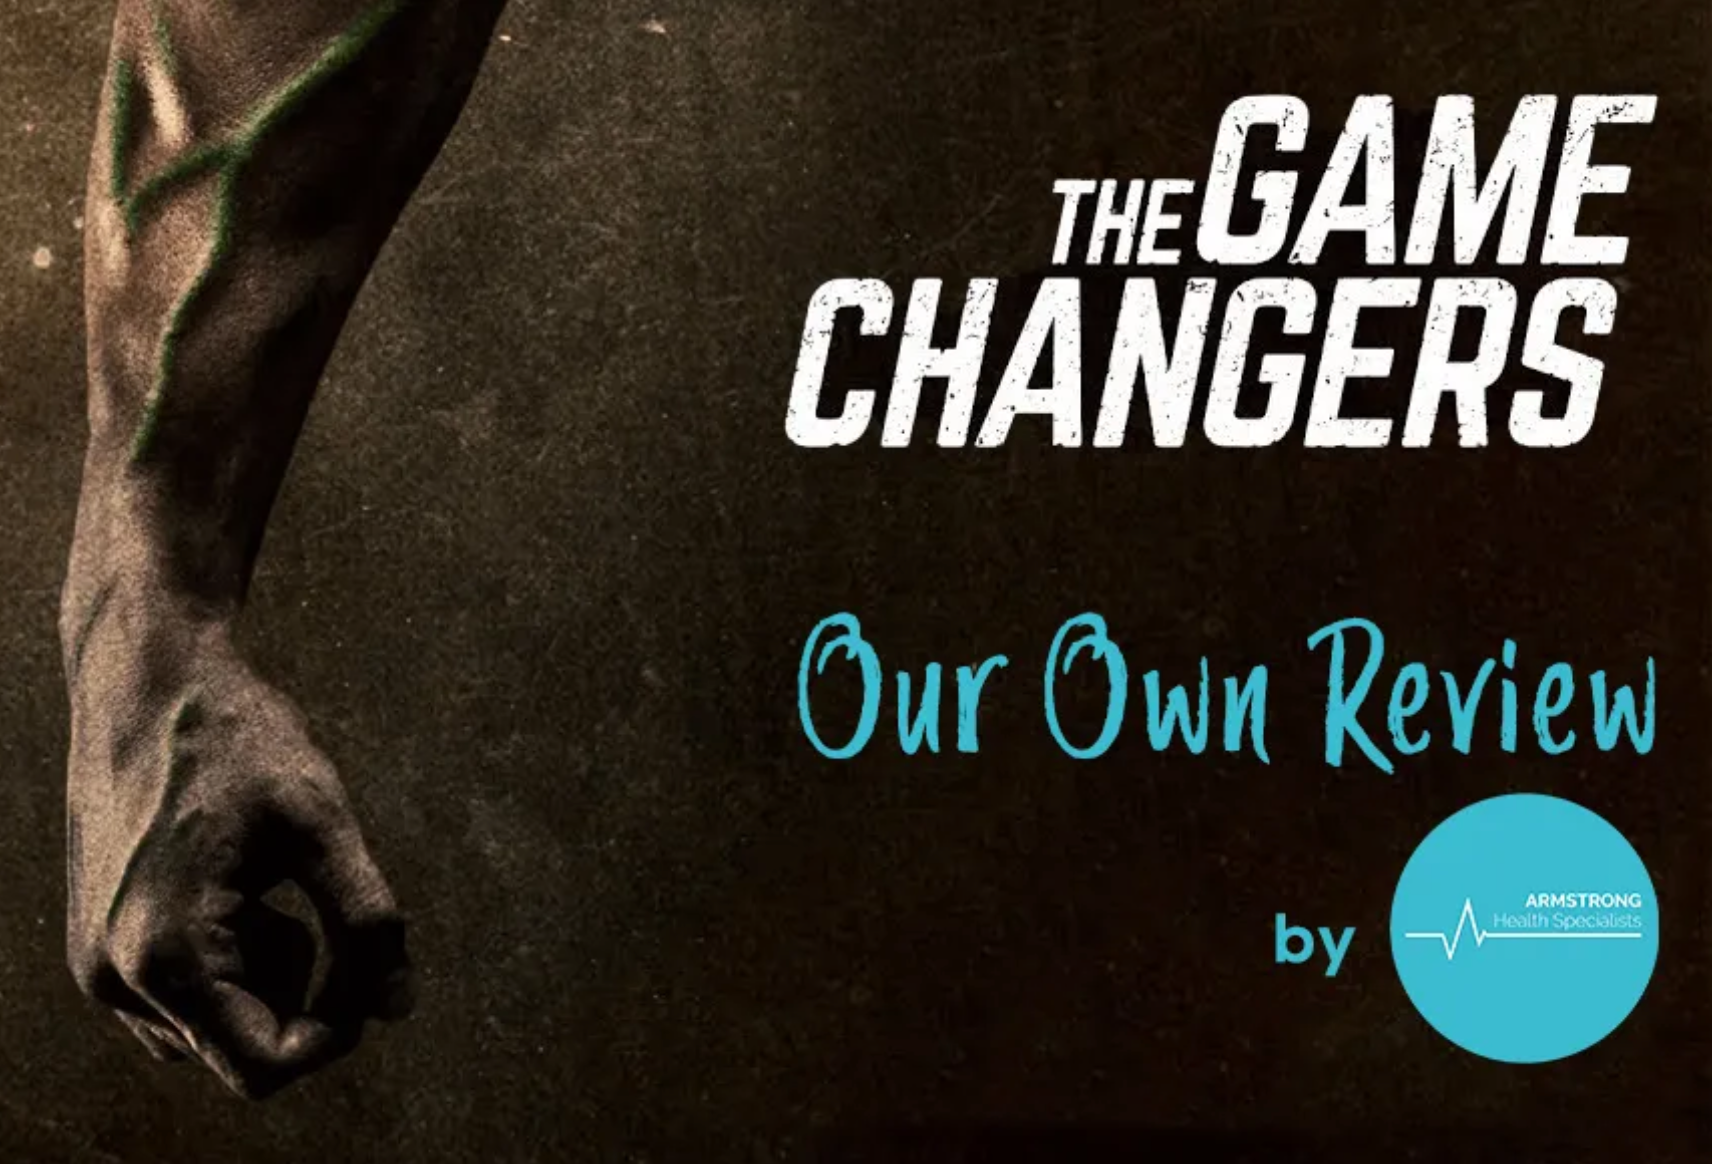 Has The Game Changer Documentary Changed Your Game (Pun Intended)?